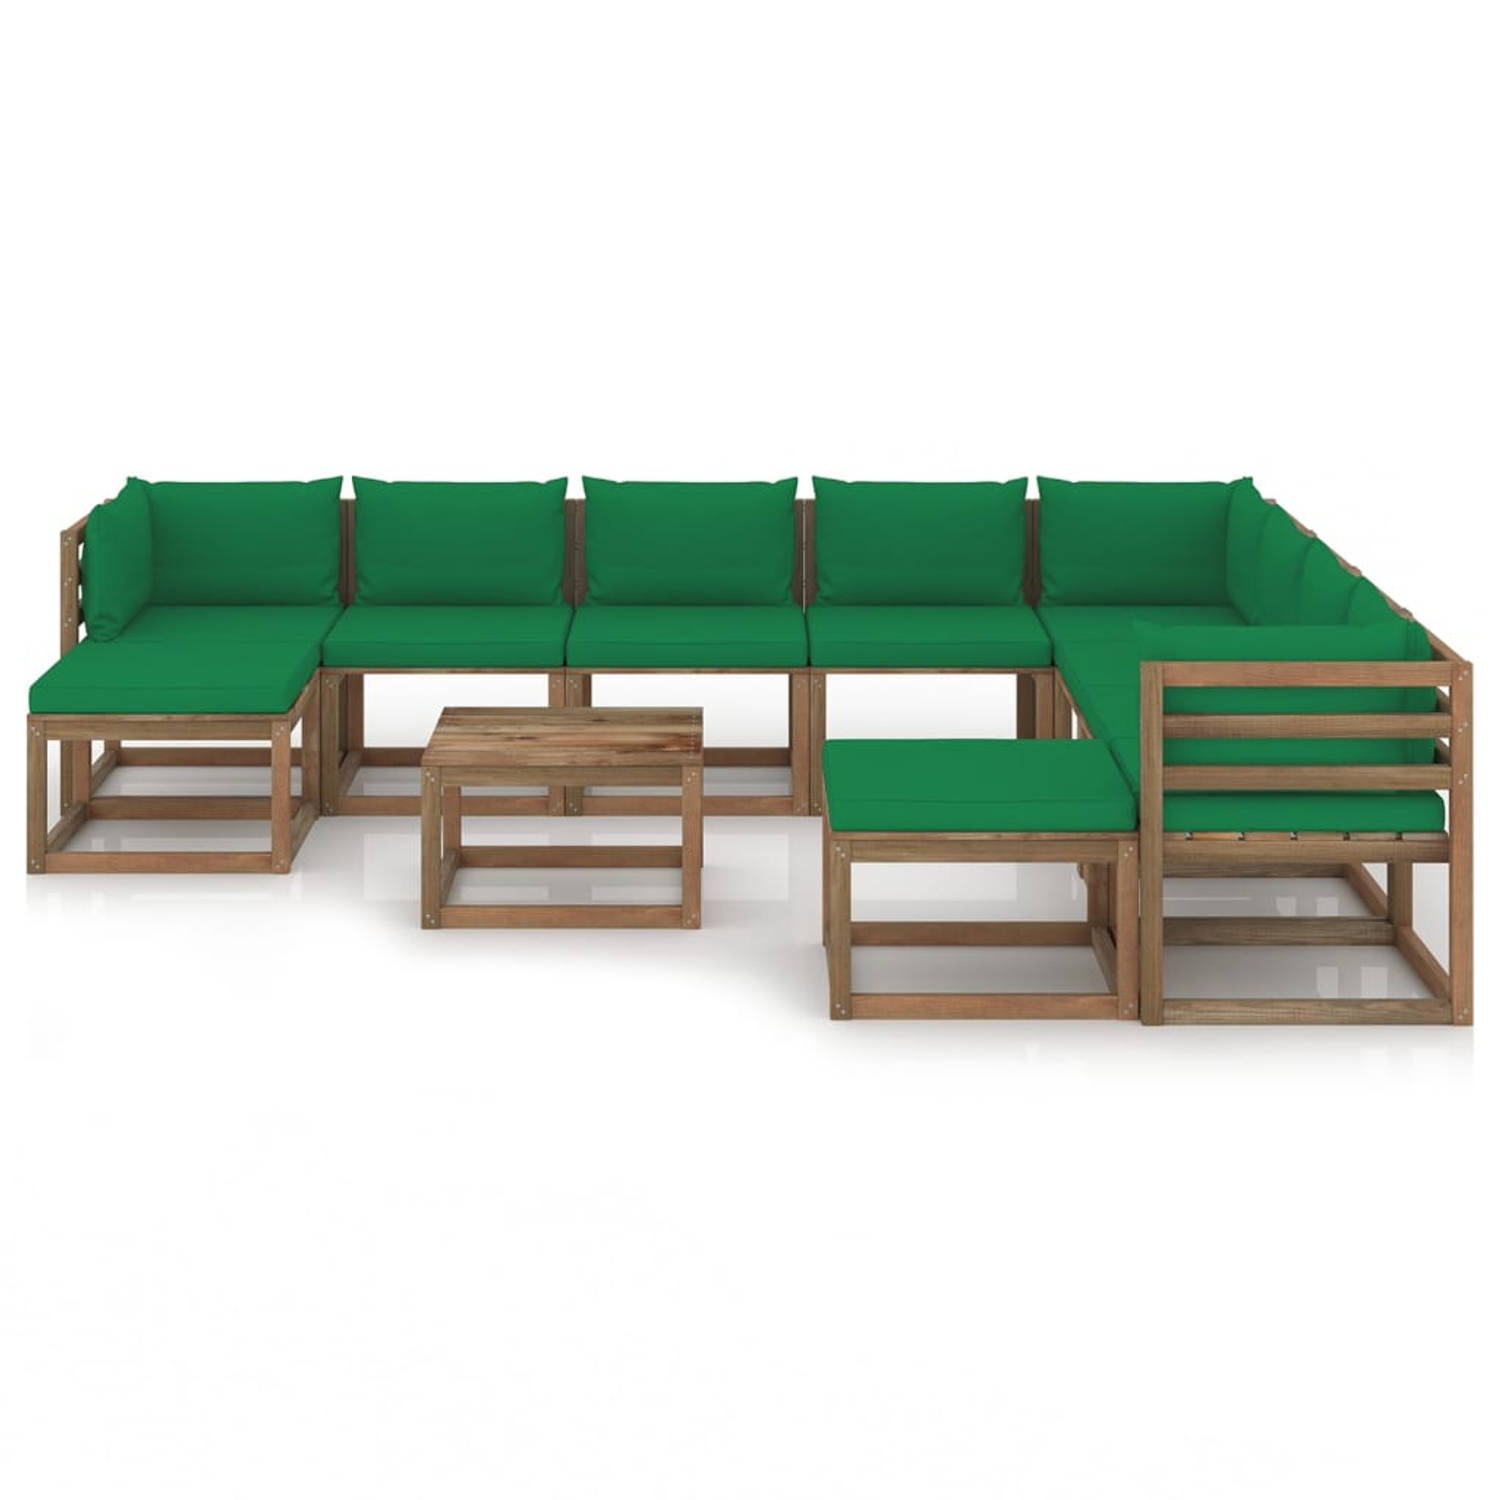 The Living Store Loungeset Gronenhout - 60x60x36.5 cm - 60x64x70 cm - 64x64x70 cm - 60x60x6 cm - 60x38x13 cm - 55.5x38x13 cm